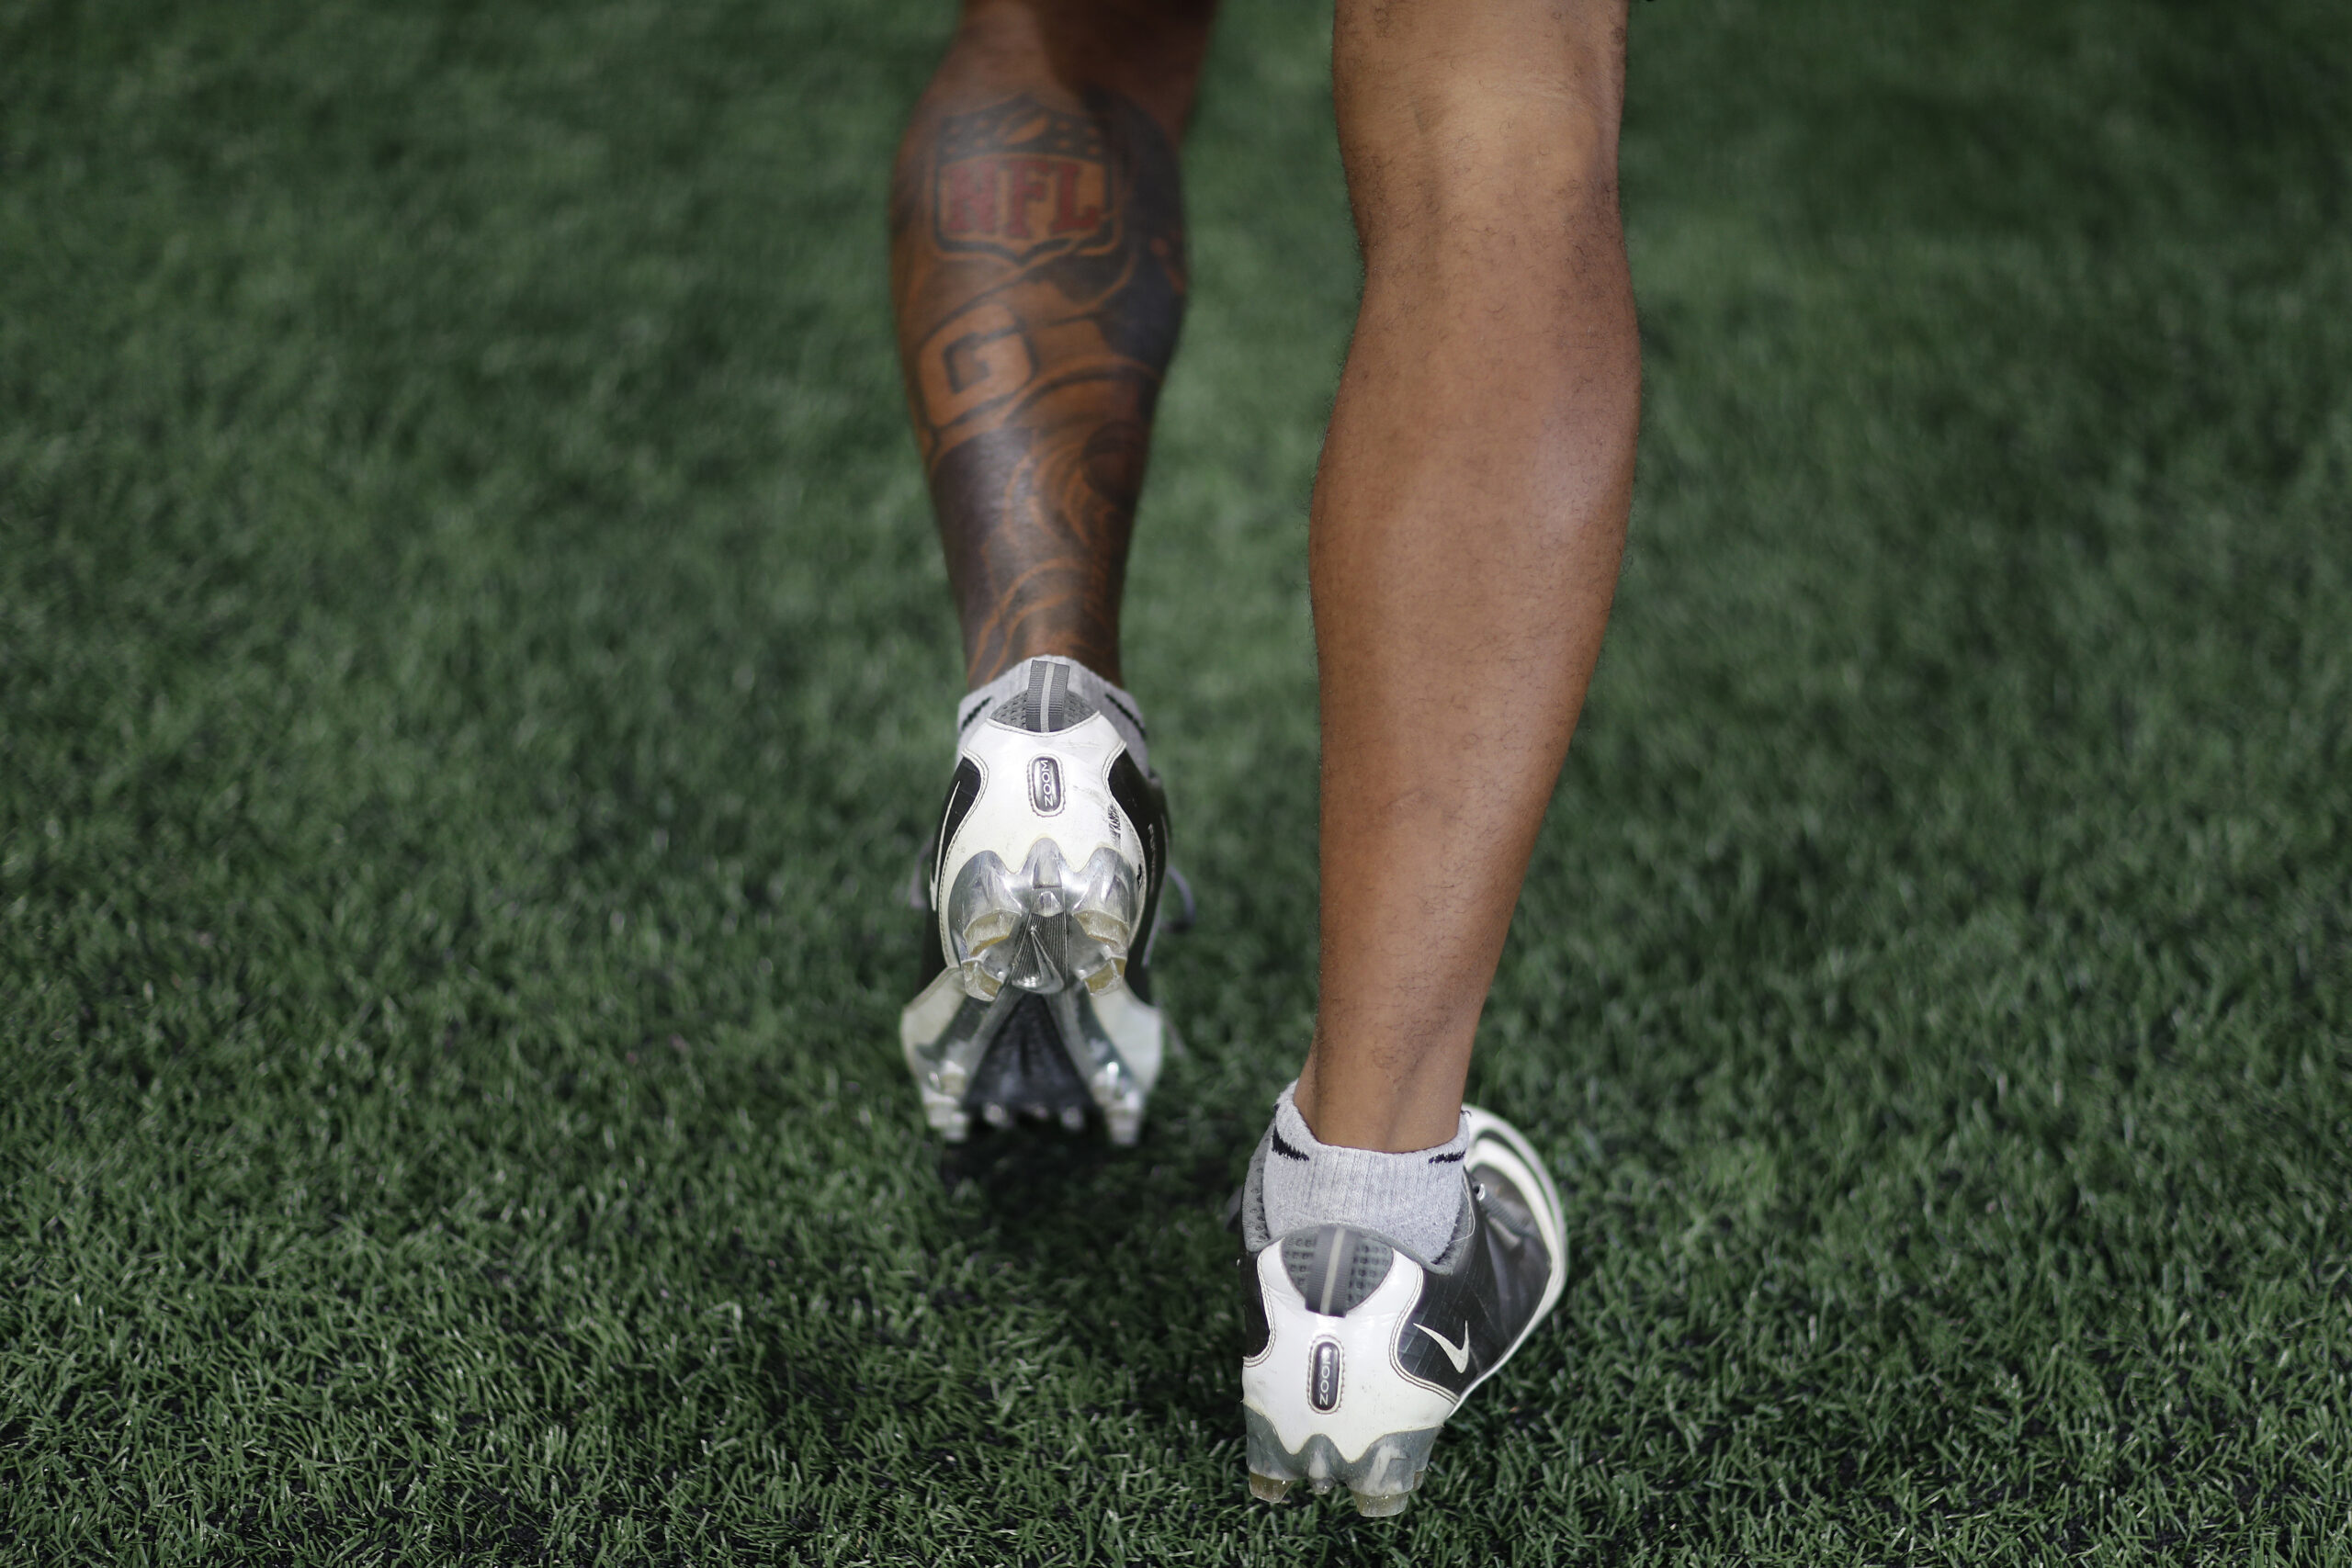 The back of the legs of a football player stepping in turf as he warms up.